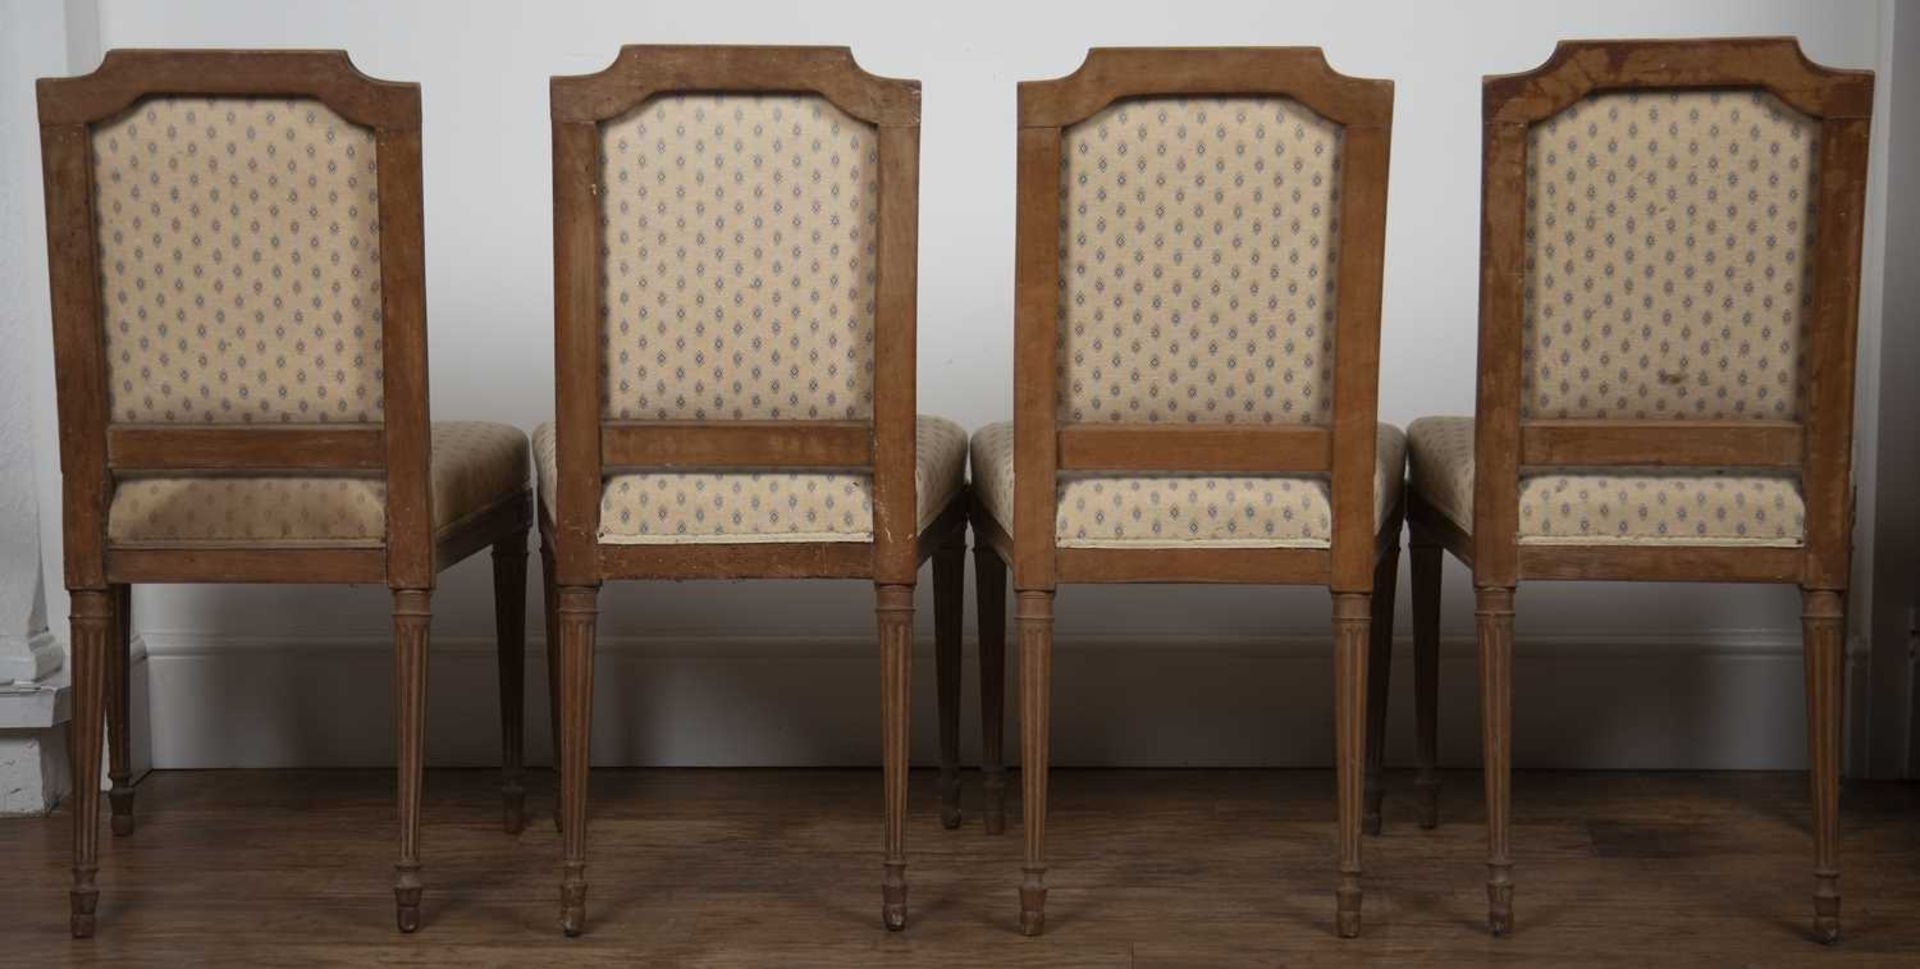 Set of four French Louis XVI style chairs with cream and blue upholstery on reeded legs, 90.5cm high - Image 2 of 3